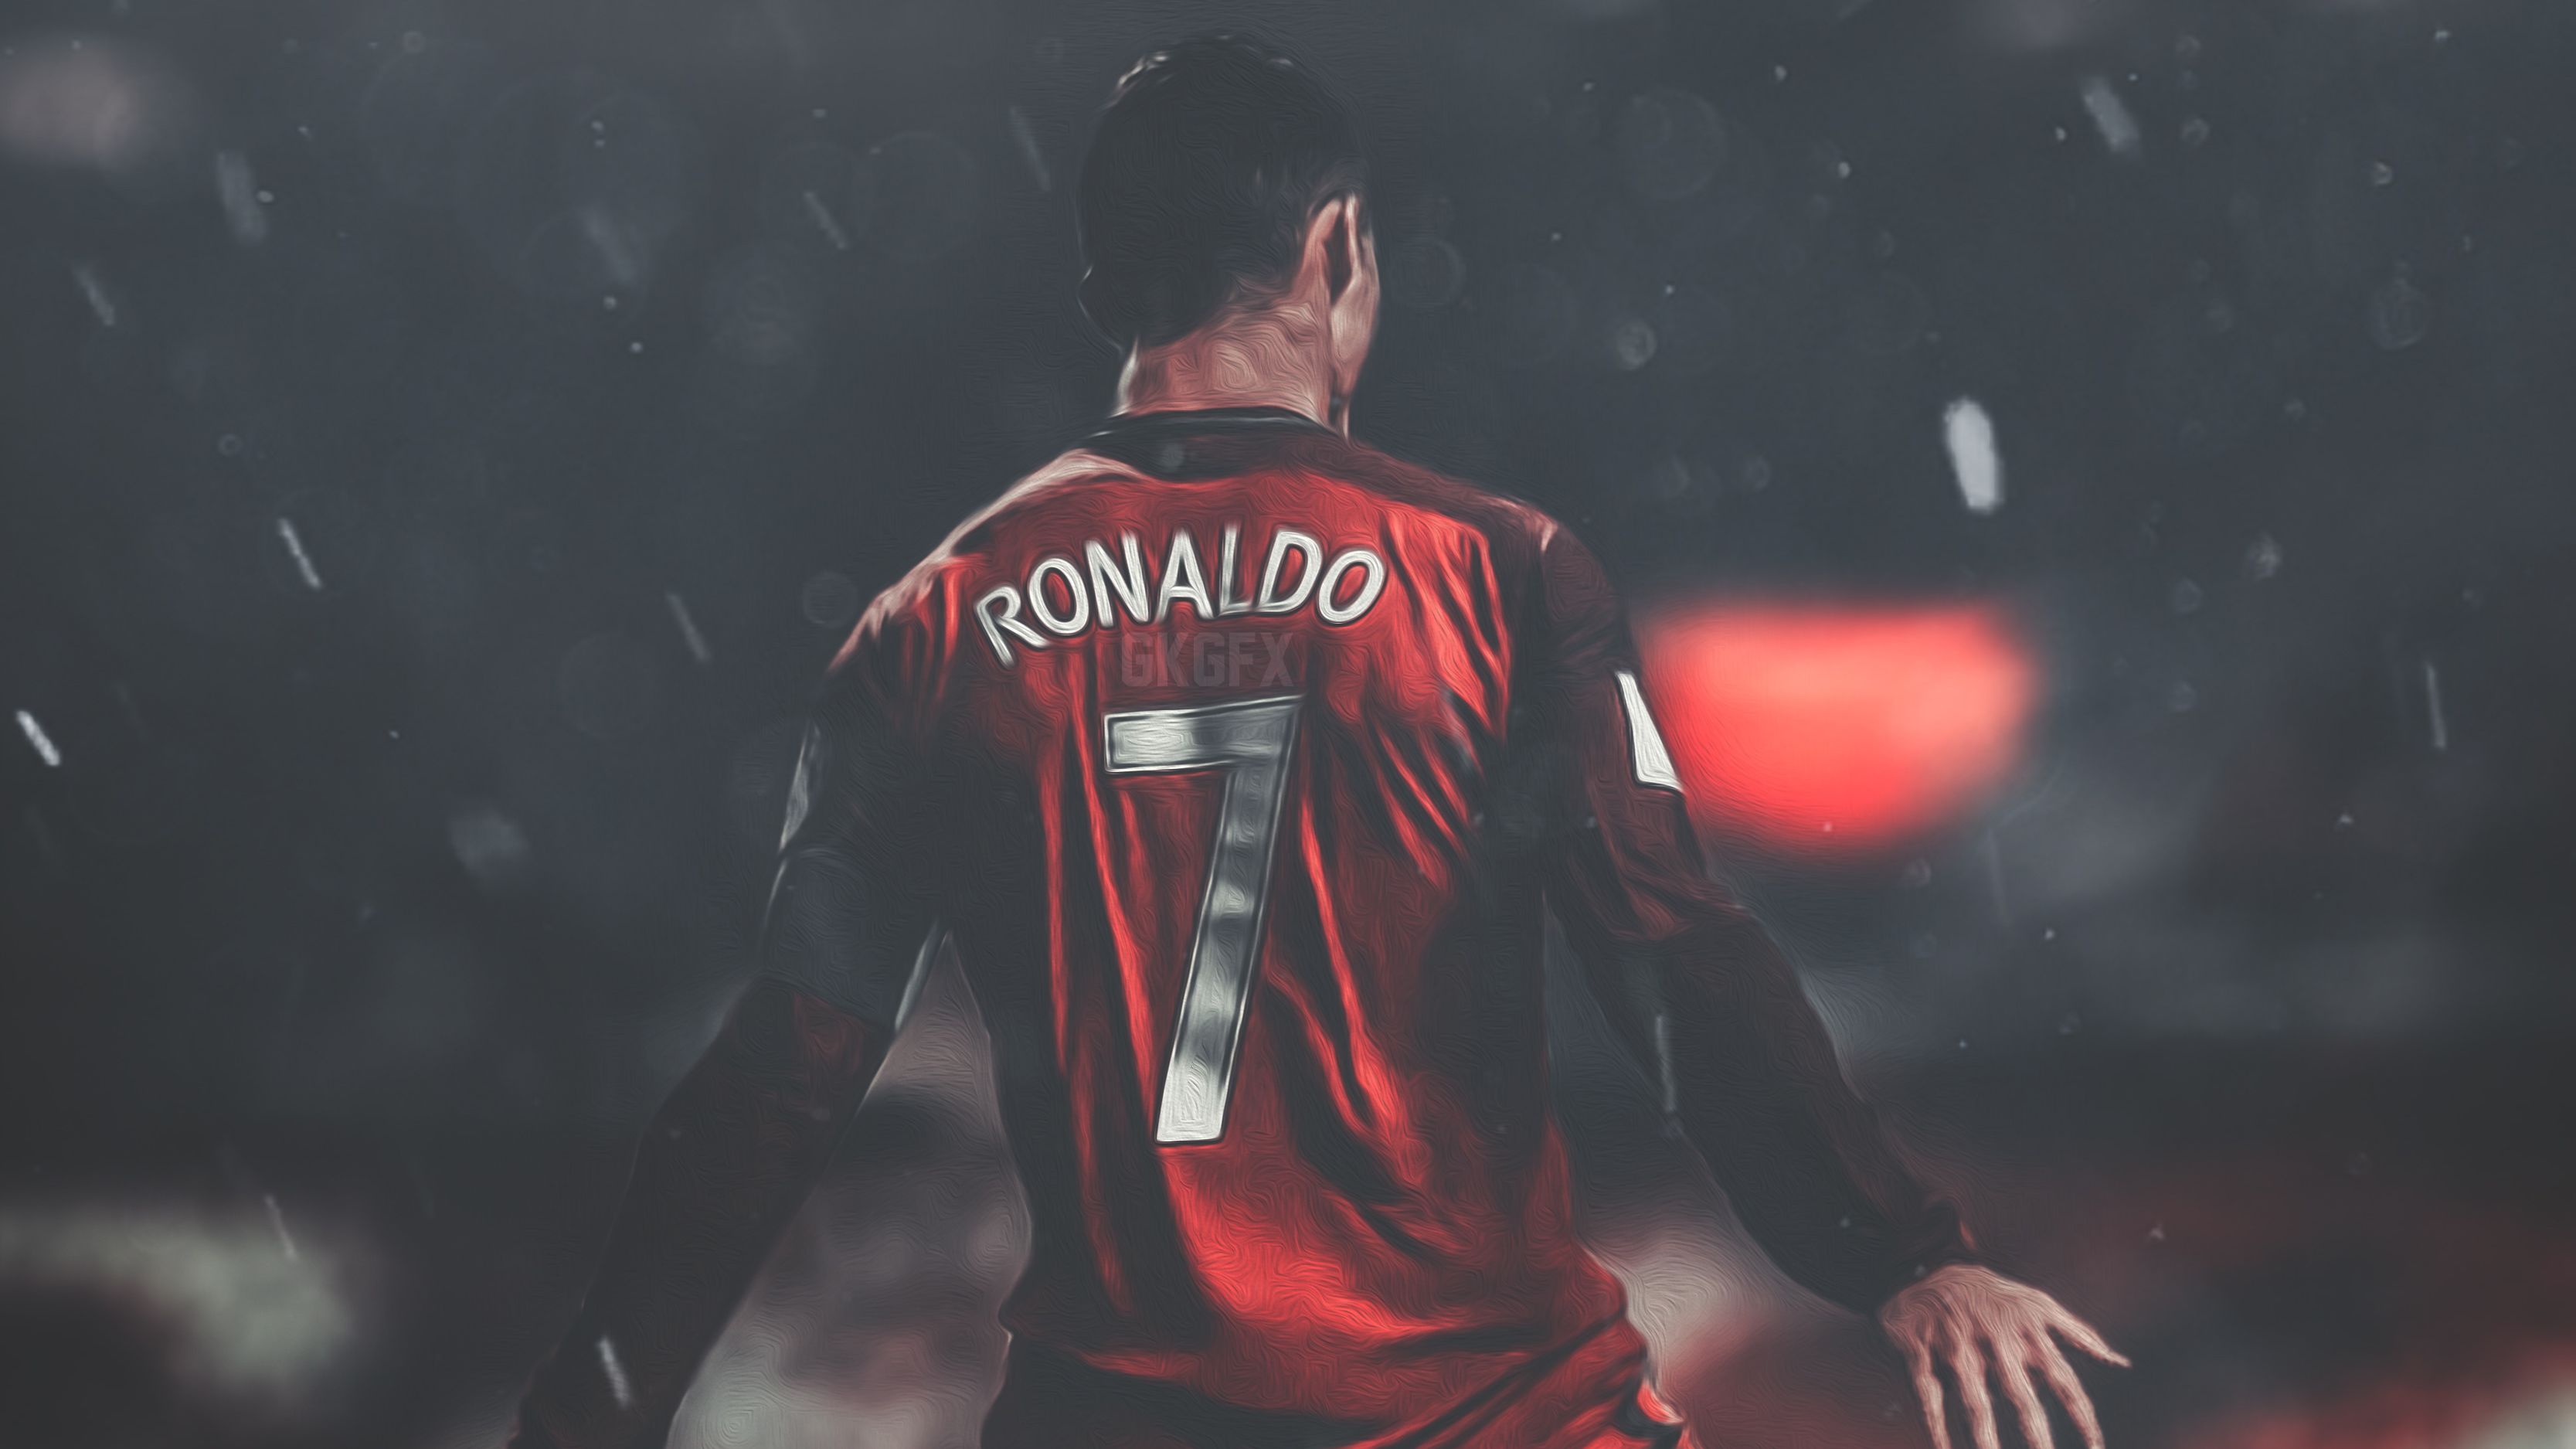 4K Wallpapers - #4K #Ronaldo #CR7 #Wallpaper #Requested_one